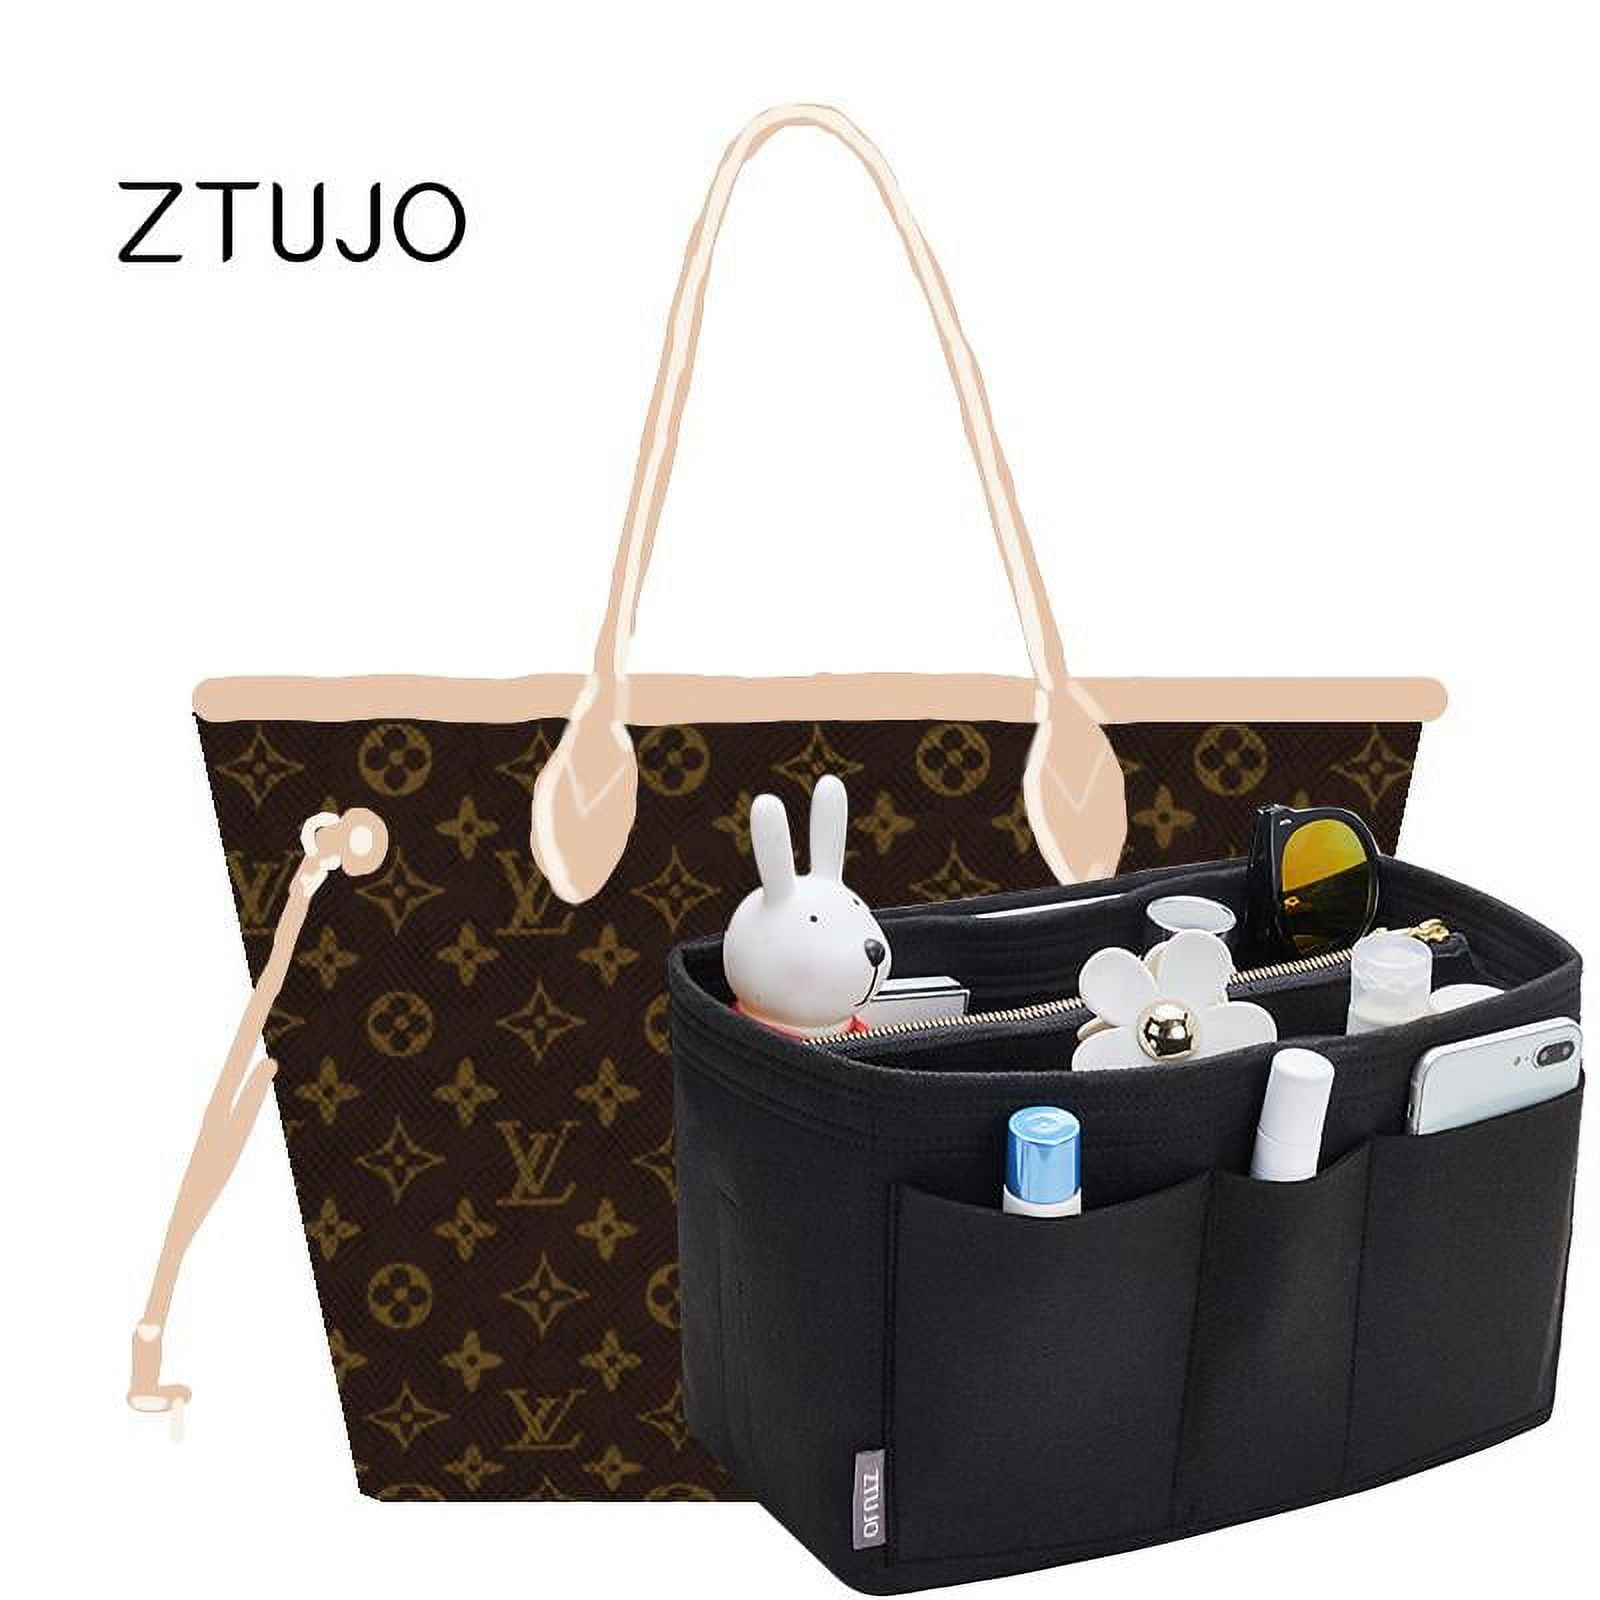 PREMIUM HIGH END VERSION OF PURSE ORGANIZER SPECIALLY FOR LV VANITY PM